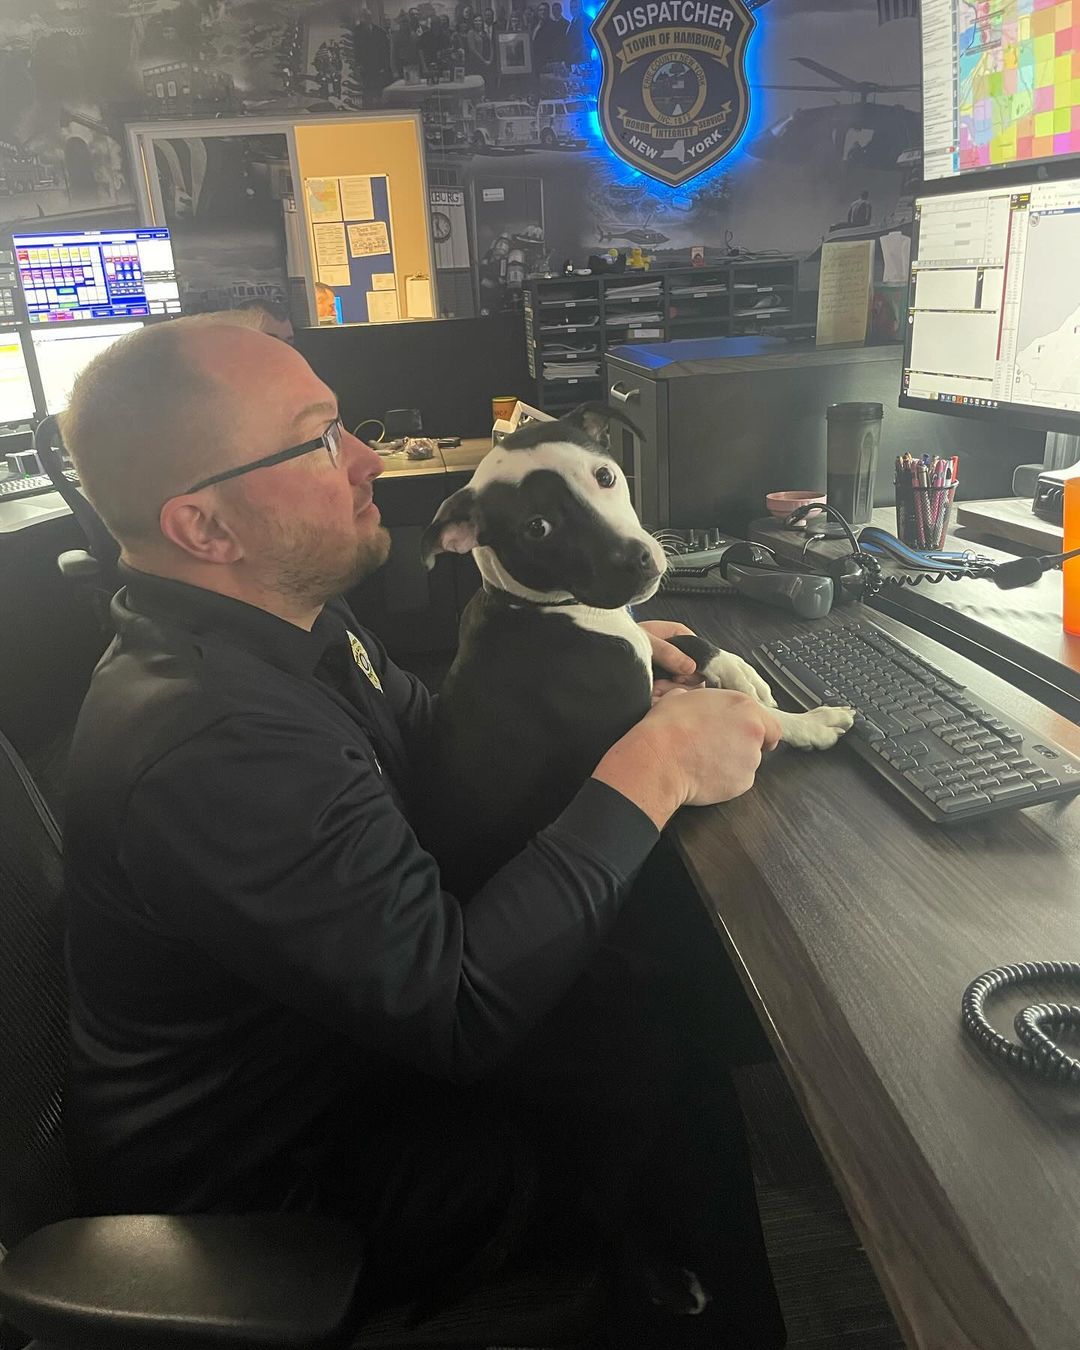 man holding a dog on himself while working on computer